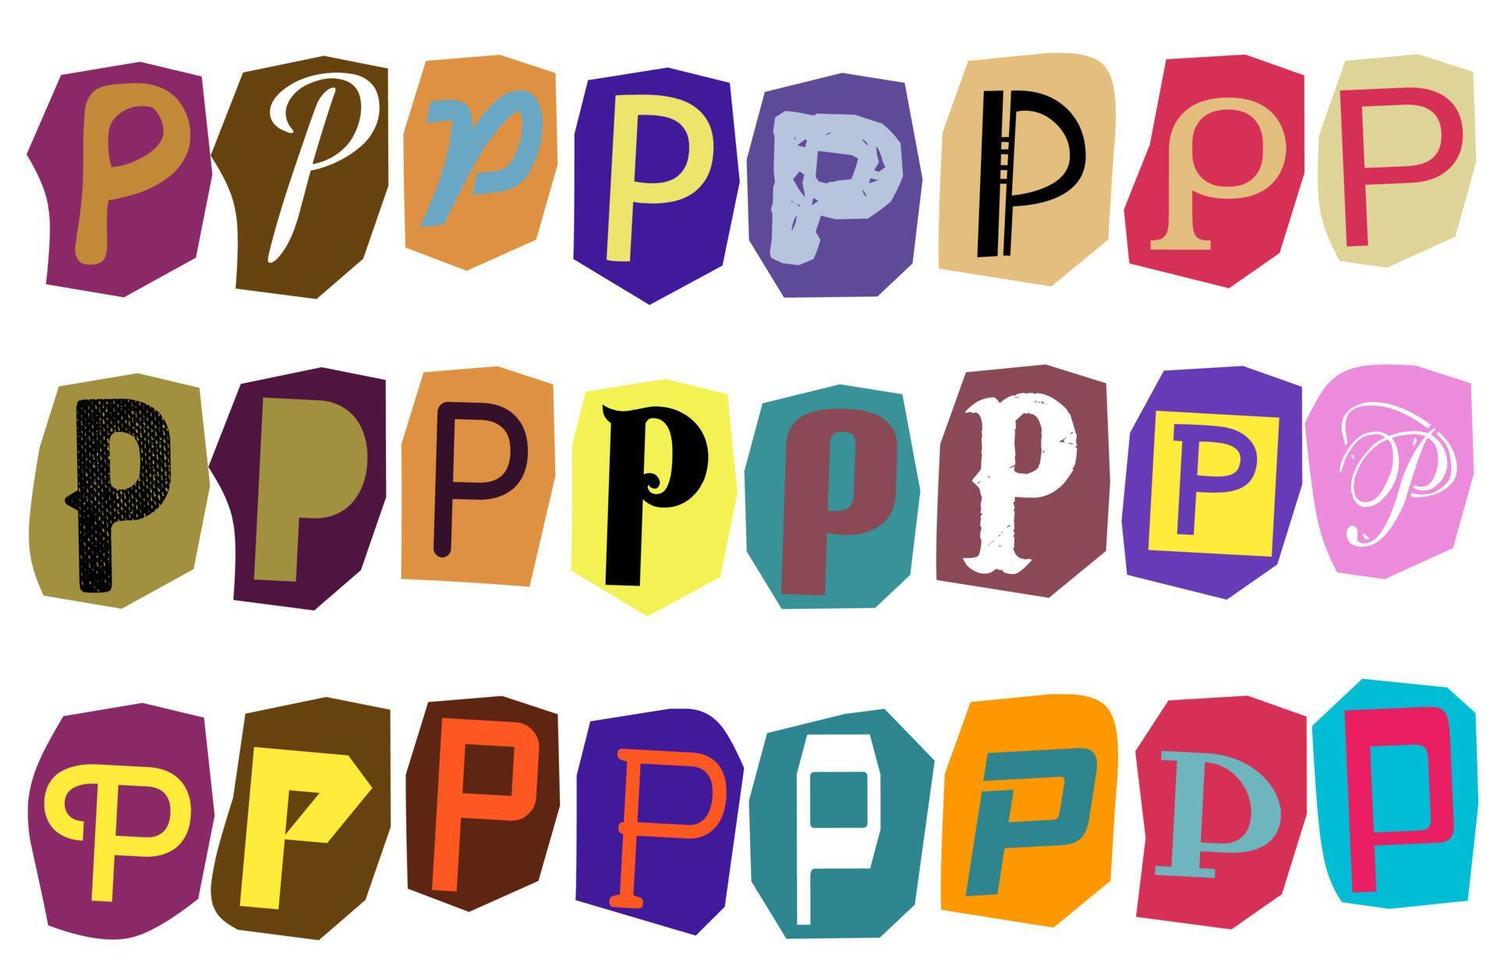 Alphabet P- vector cut newspaper and magazine letters, paper style ransom note letter